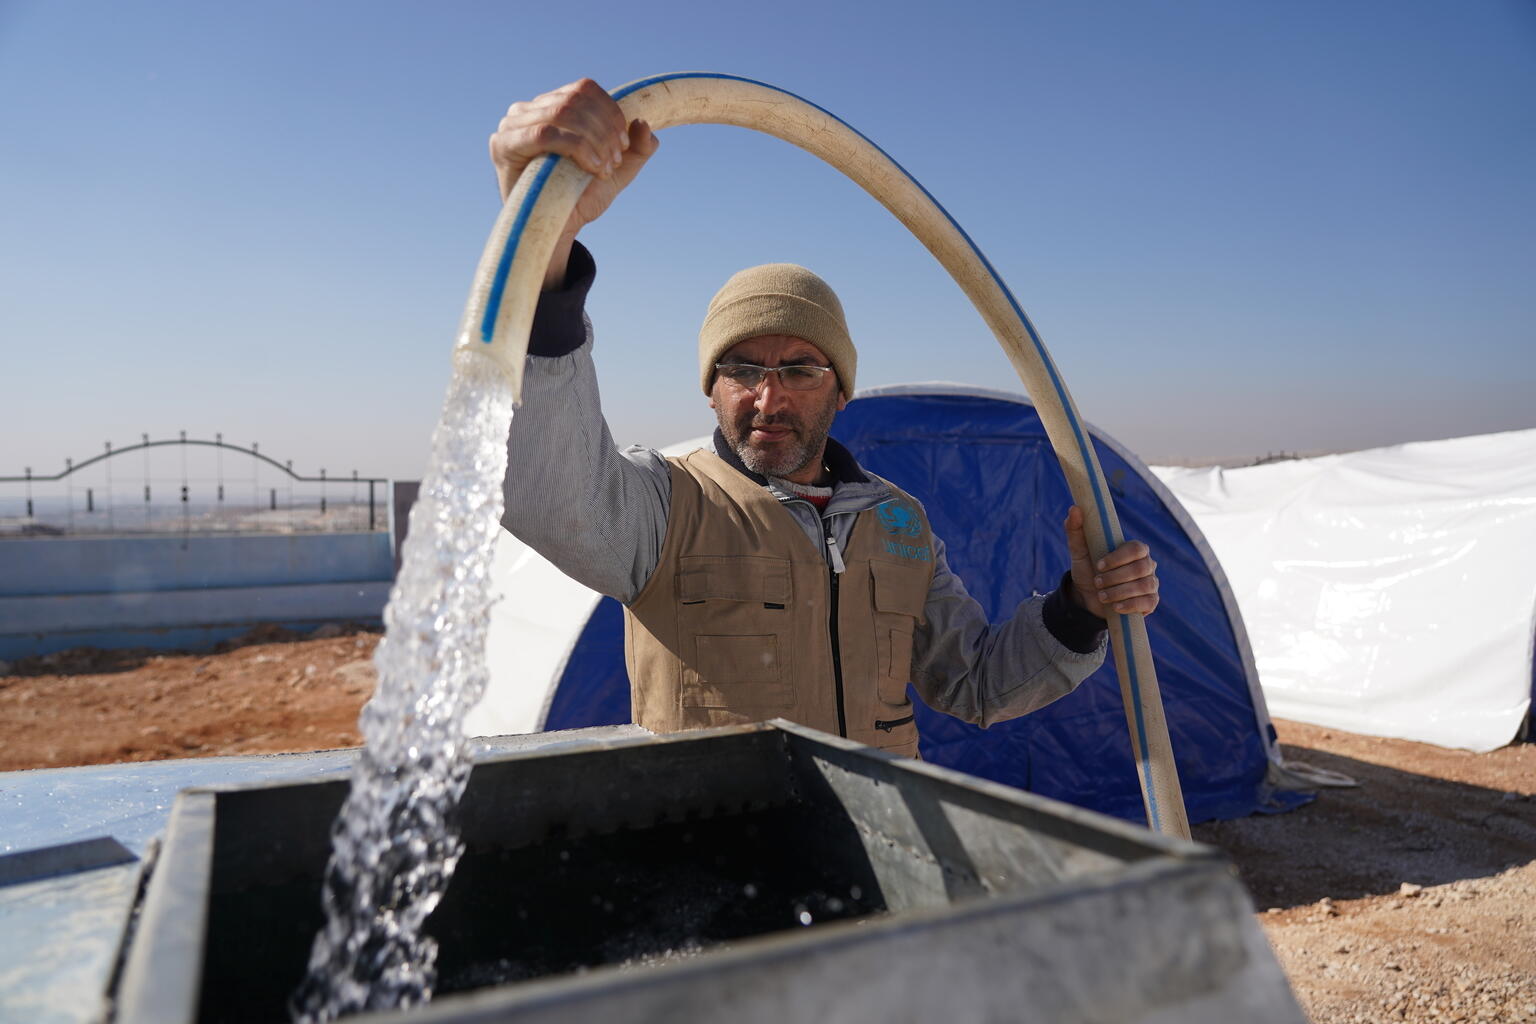 Hope & Resilience in Turkiye & Syria - a UNICEF supported worker delivers safe drinking water to camp for displaced people.